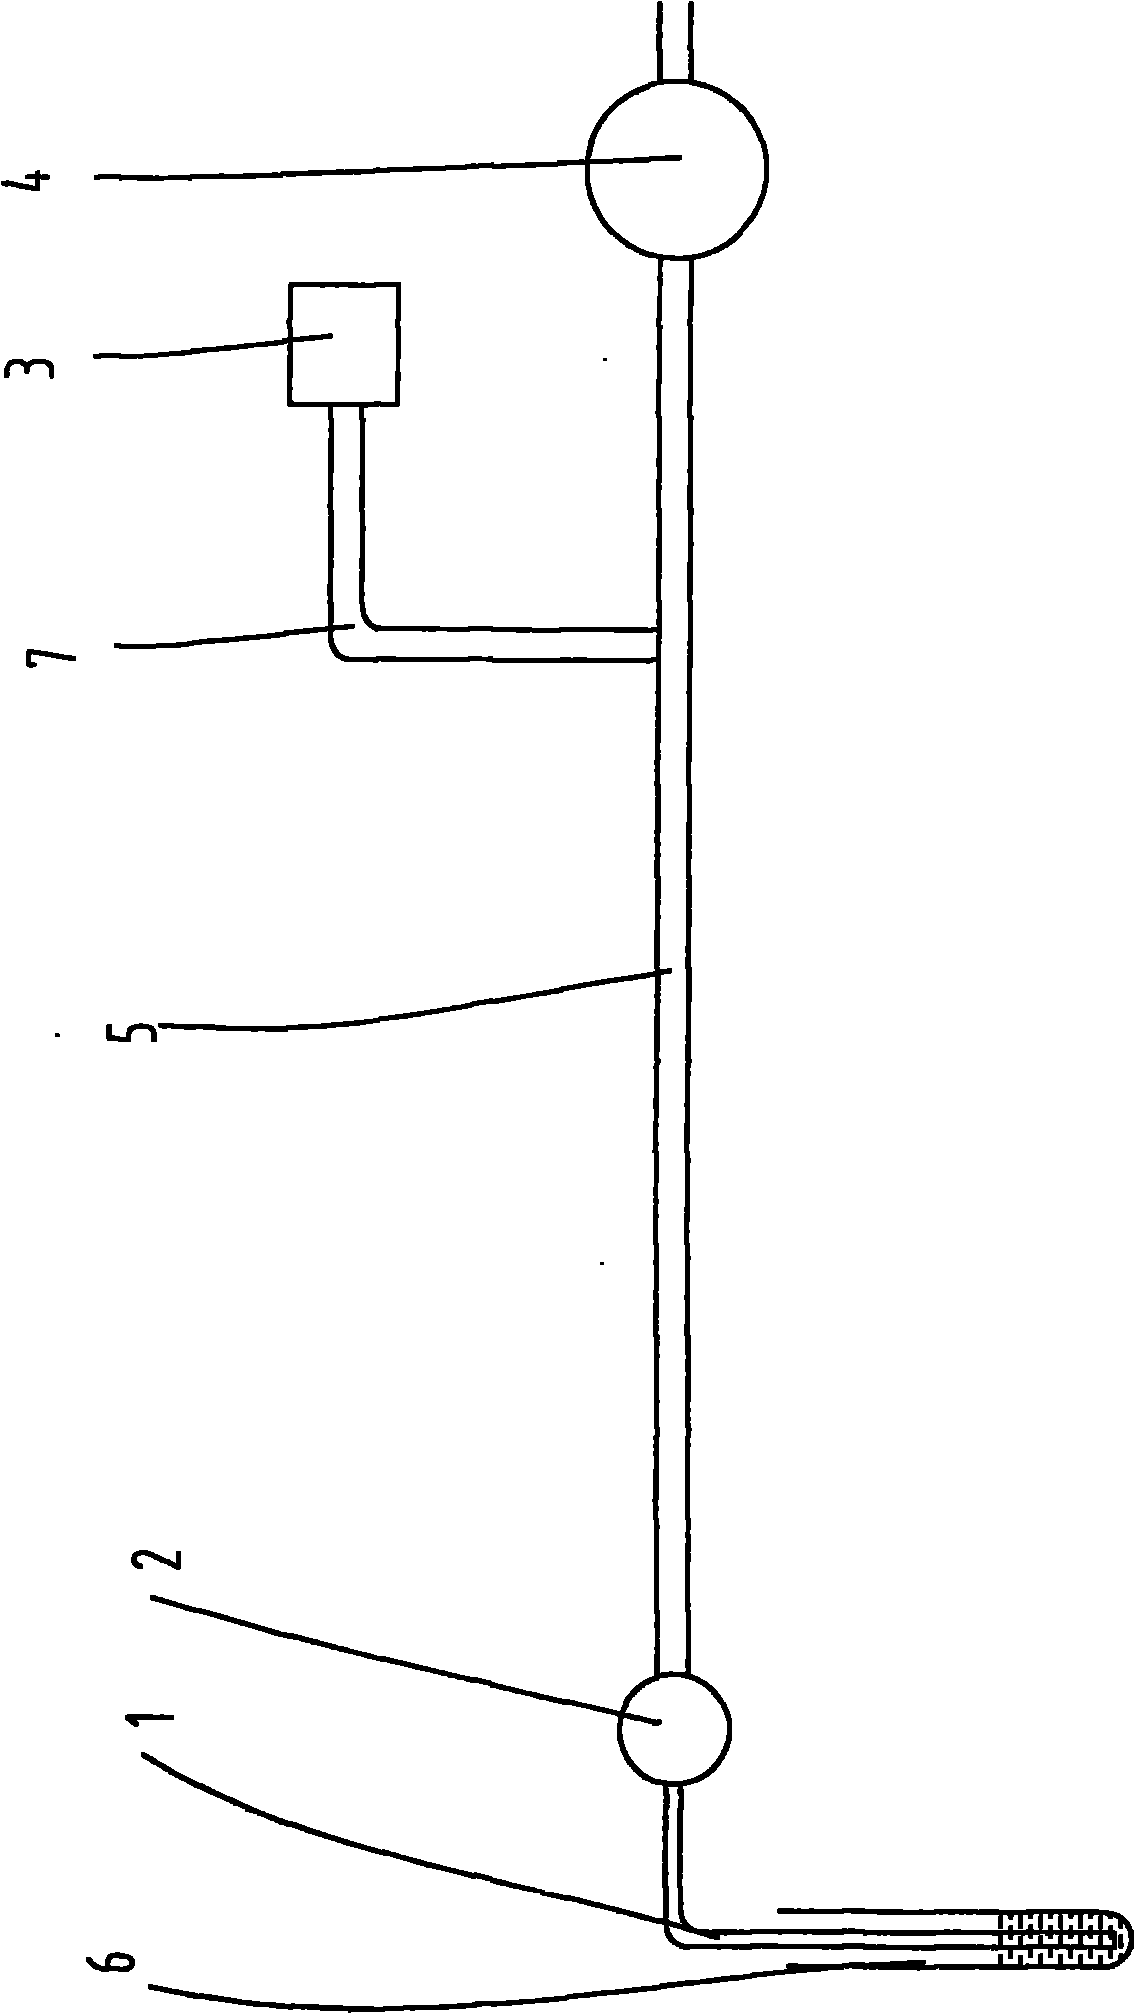 Blood viscosity fast detection device and method thereof